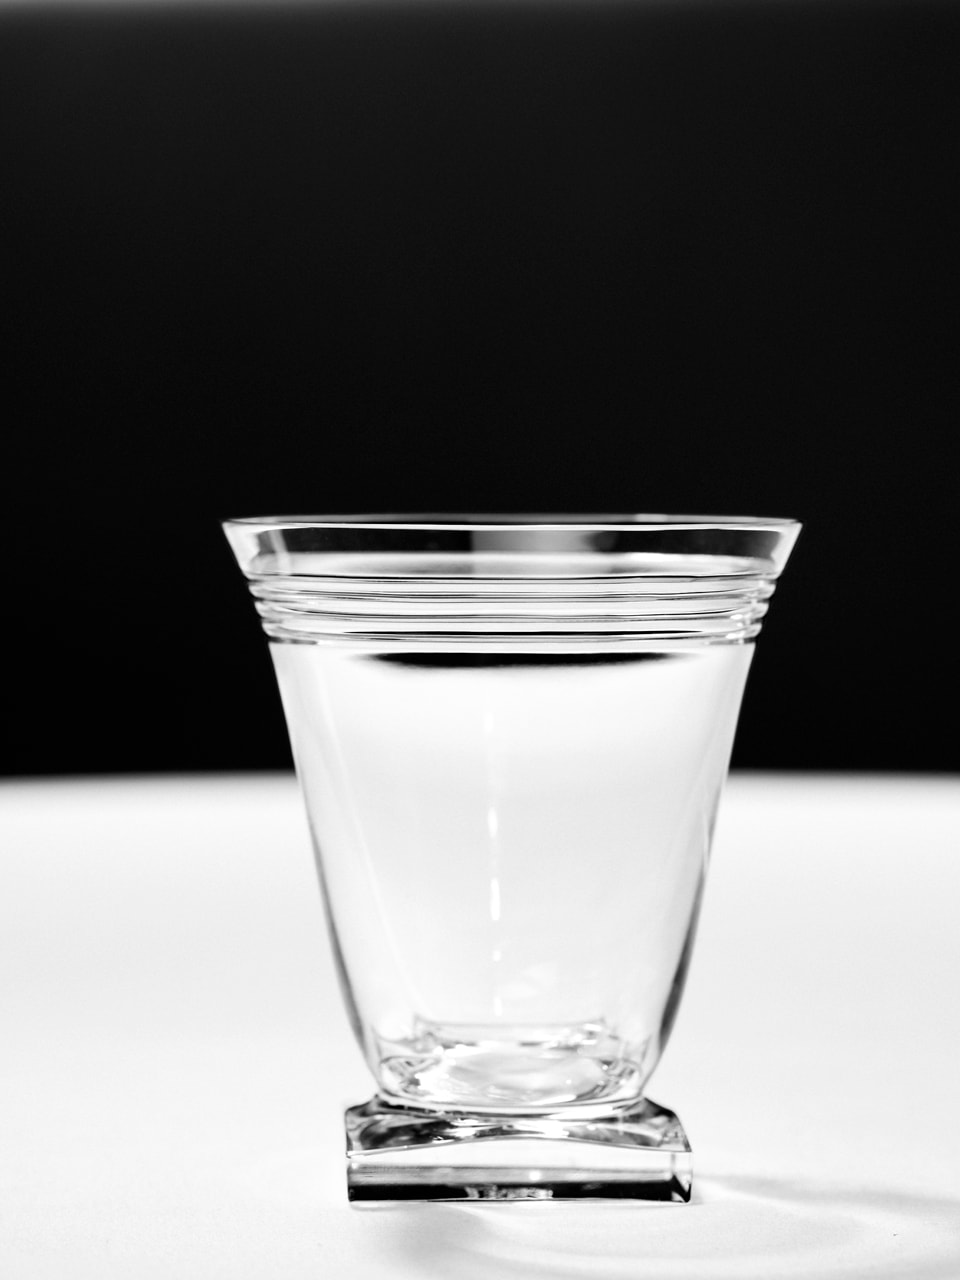 Thom Browne and Baccarat Join Forces for Archive-Inspired Crystal Glass Collection